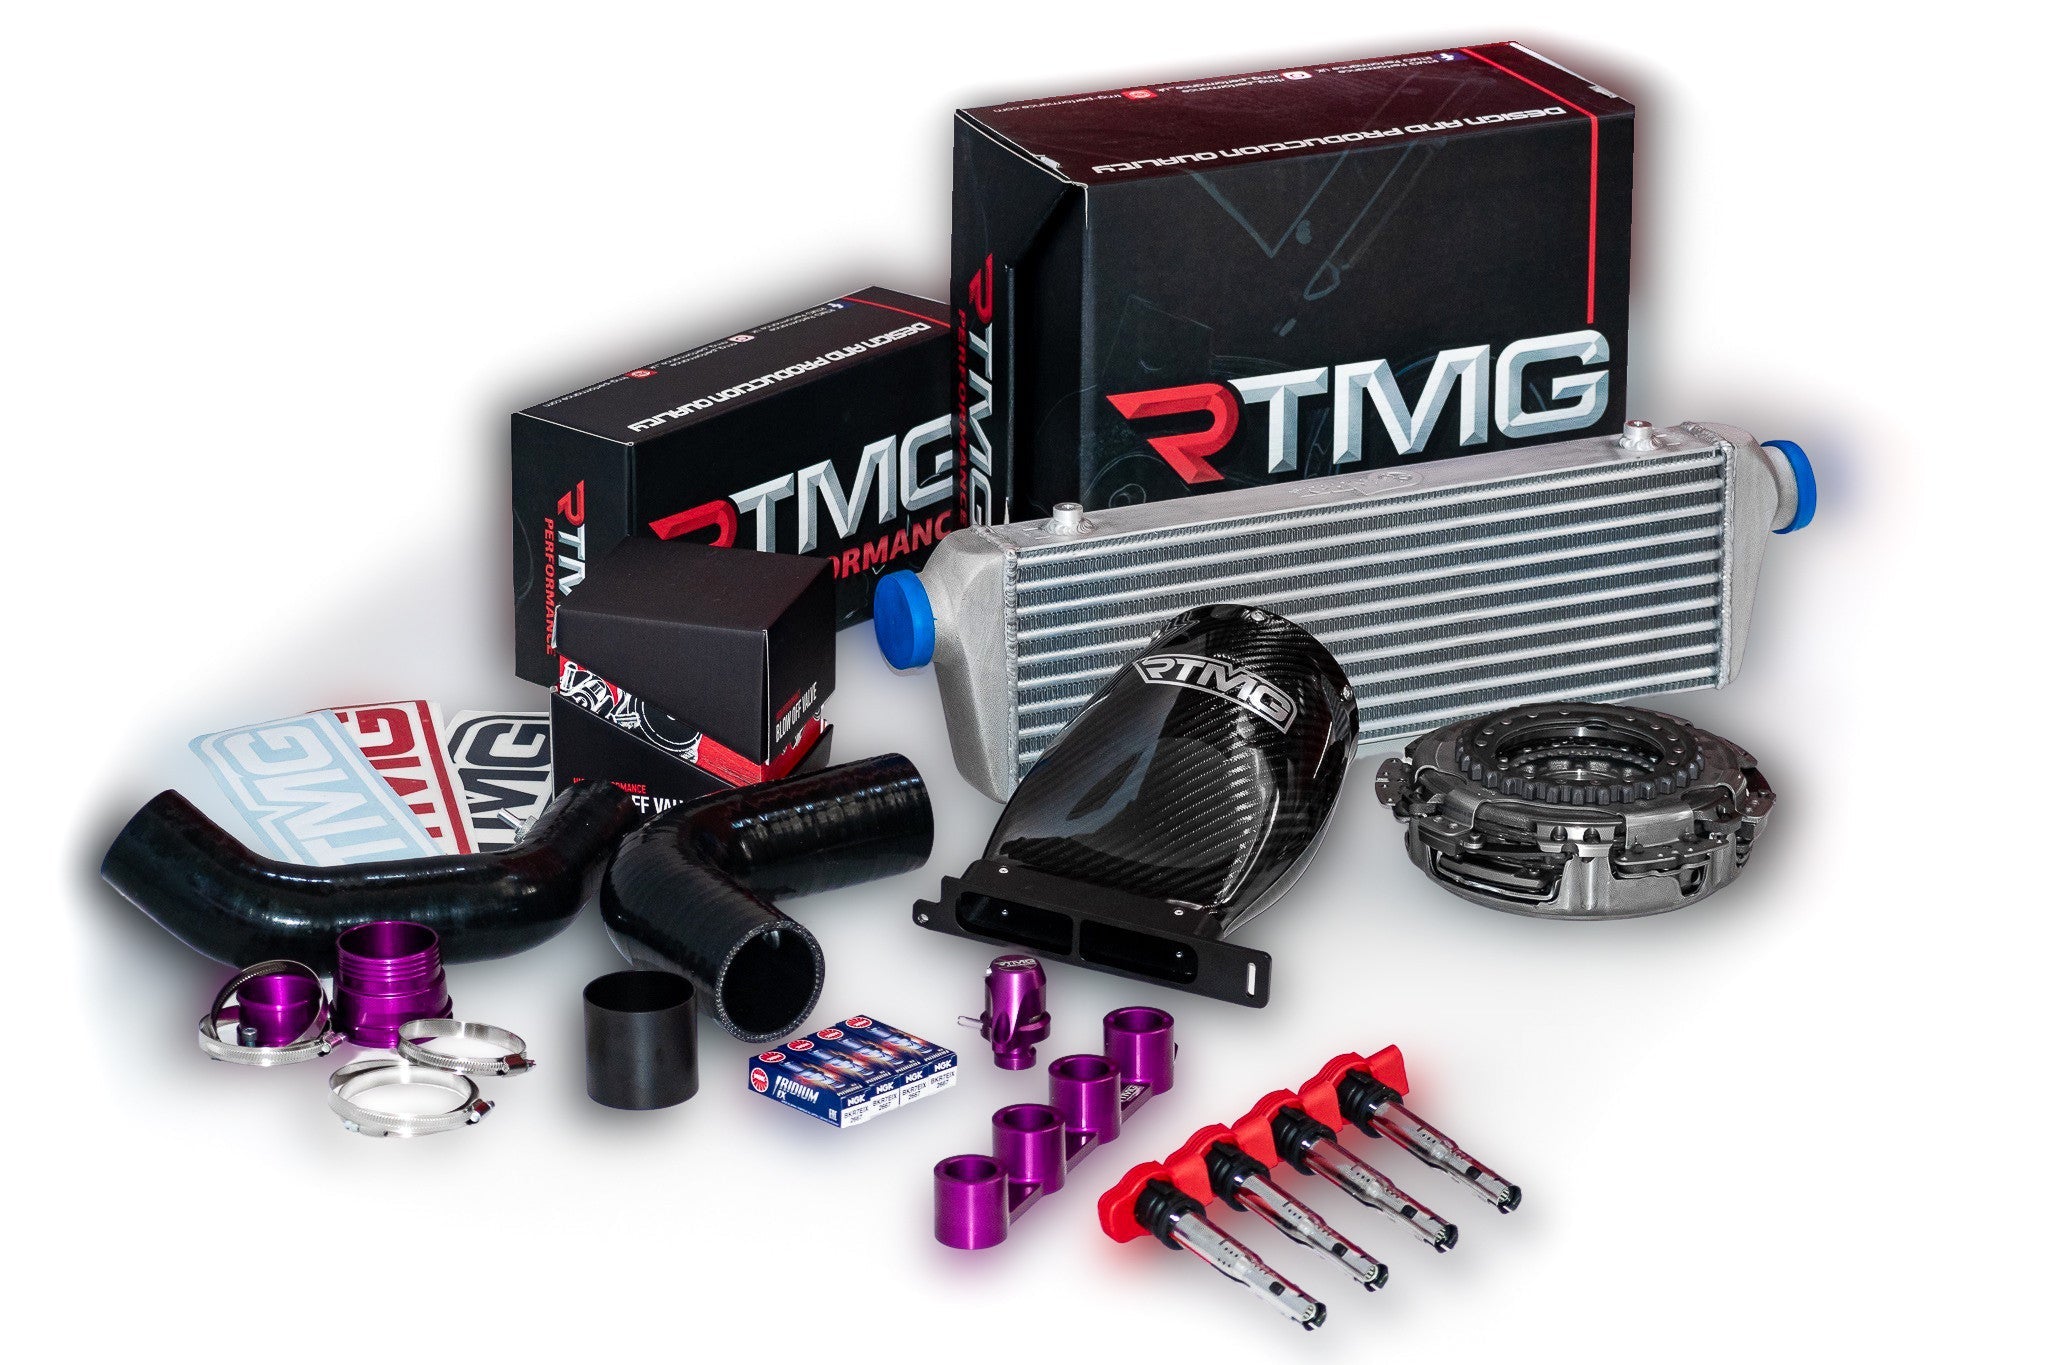 Stage 2 Tuning Kit for 1.4 TSI EA111 Twincharger - Up to 250 HP - RTMG Performance